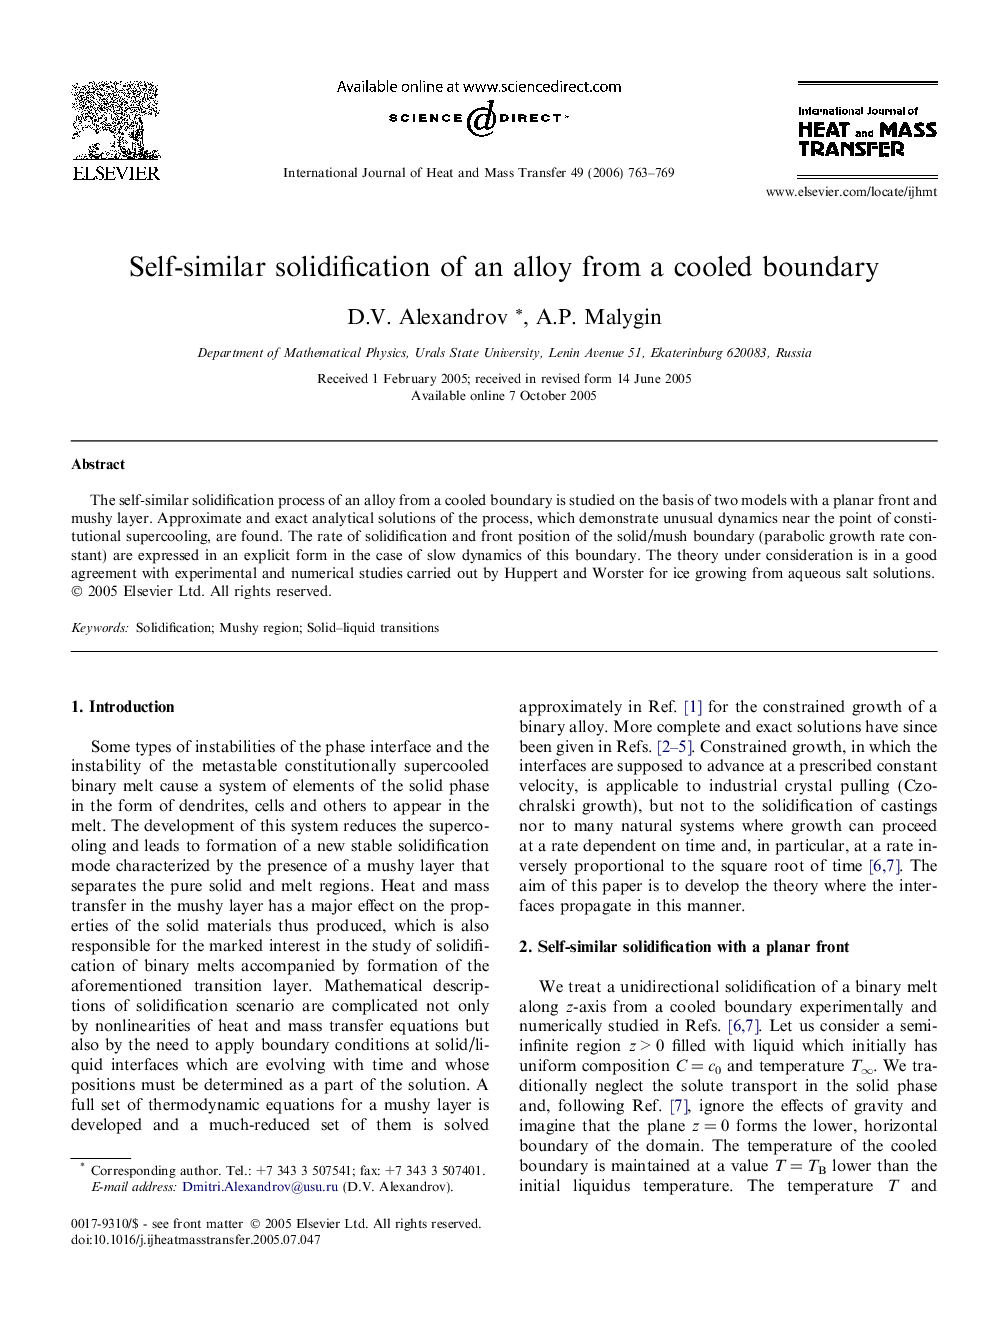 Self-similar solidification of an alloy from a cooled boundary